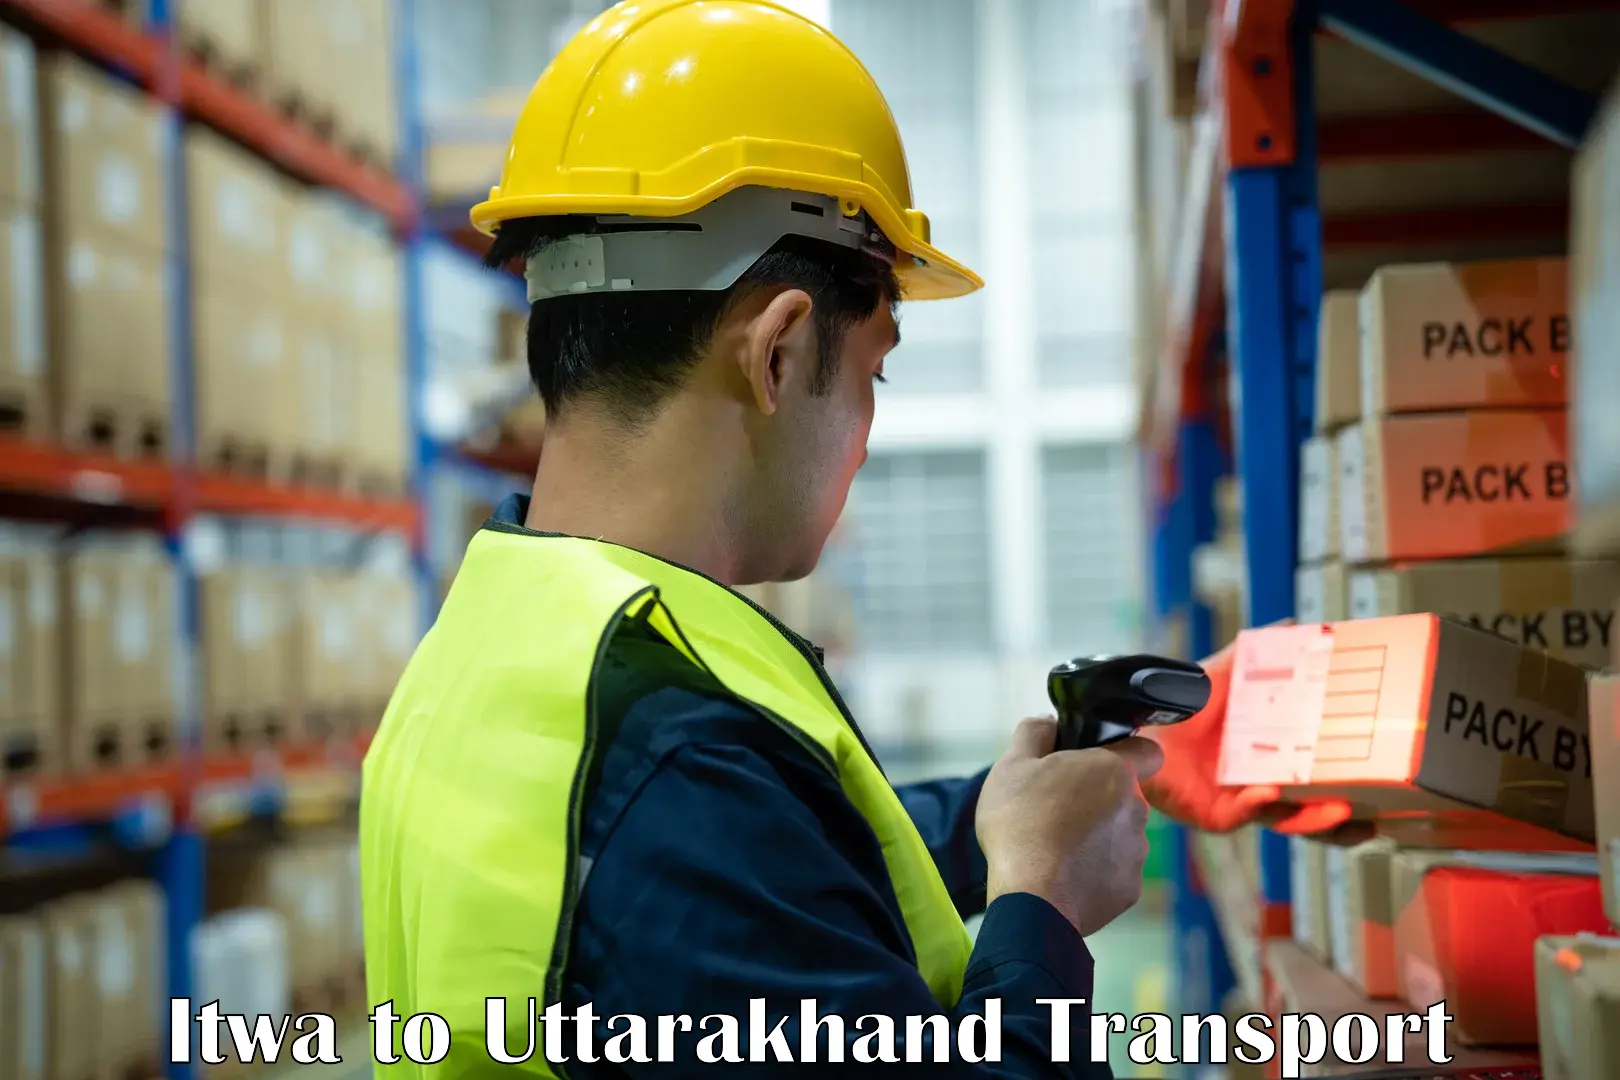 Container transport service Itwa to Uttarakhand